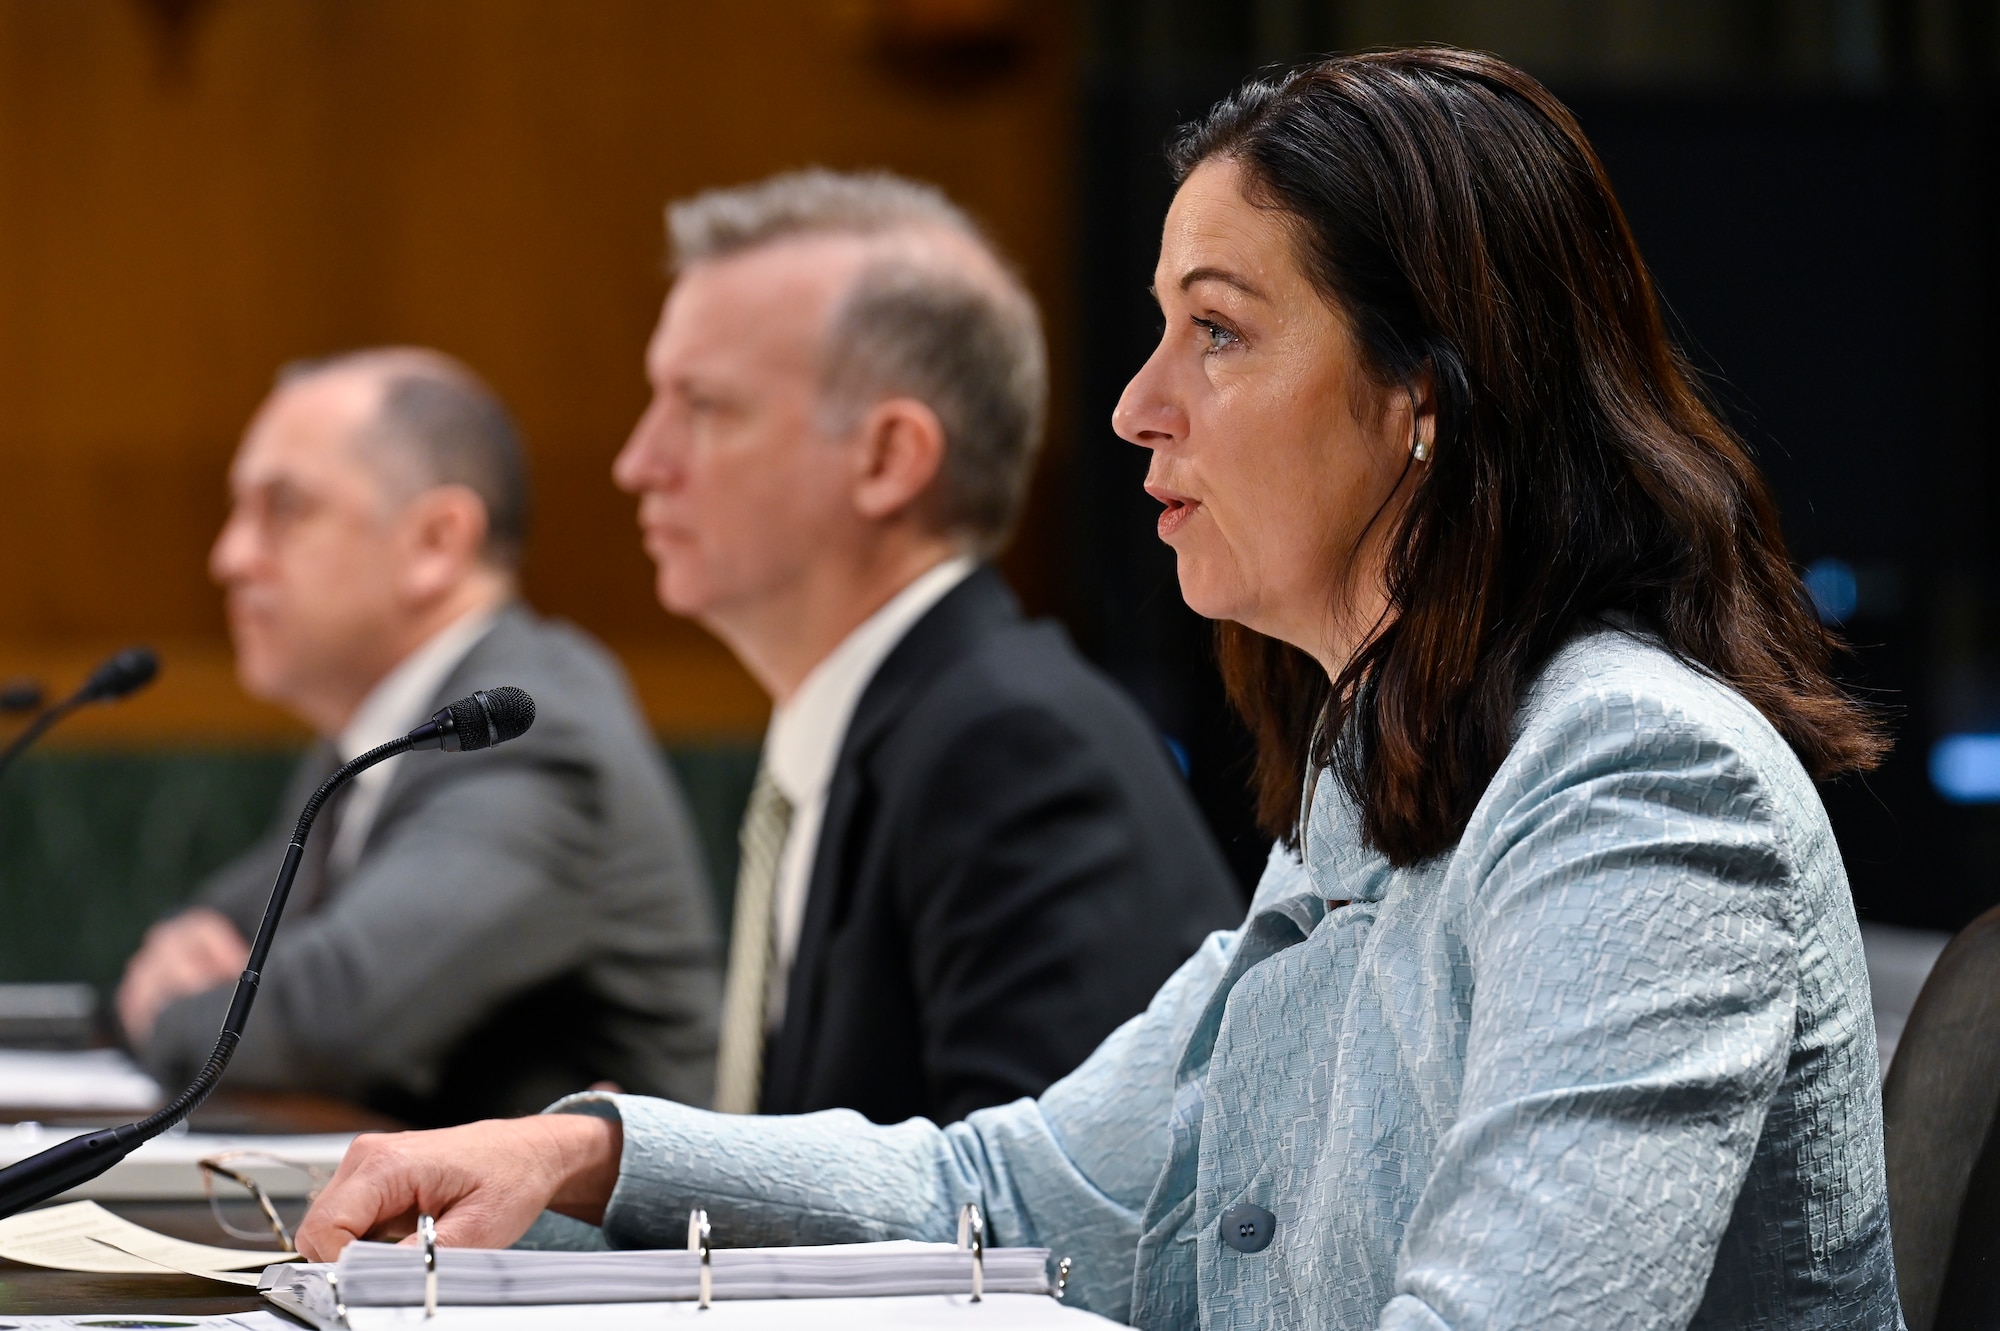 Kristyn Jones, assistant secretary of the Air Force for Financial Management and Comptroller, performing the duties of Under Secretary of the Air Force, Undersecretary of the Navy Erik Raven and Undersecretary of the Army Gabriel Camarillo testify before the Senate Armed Services Committee on military recruiting challenges in Washington, D.C., March 22, 2023. (U.S. Air Force photo by Eric Dietrich)